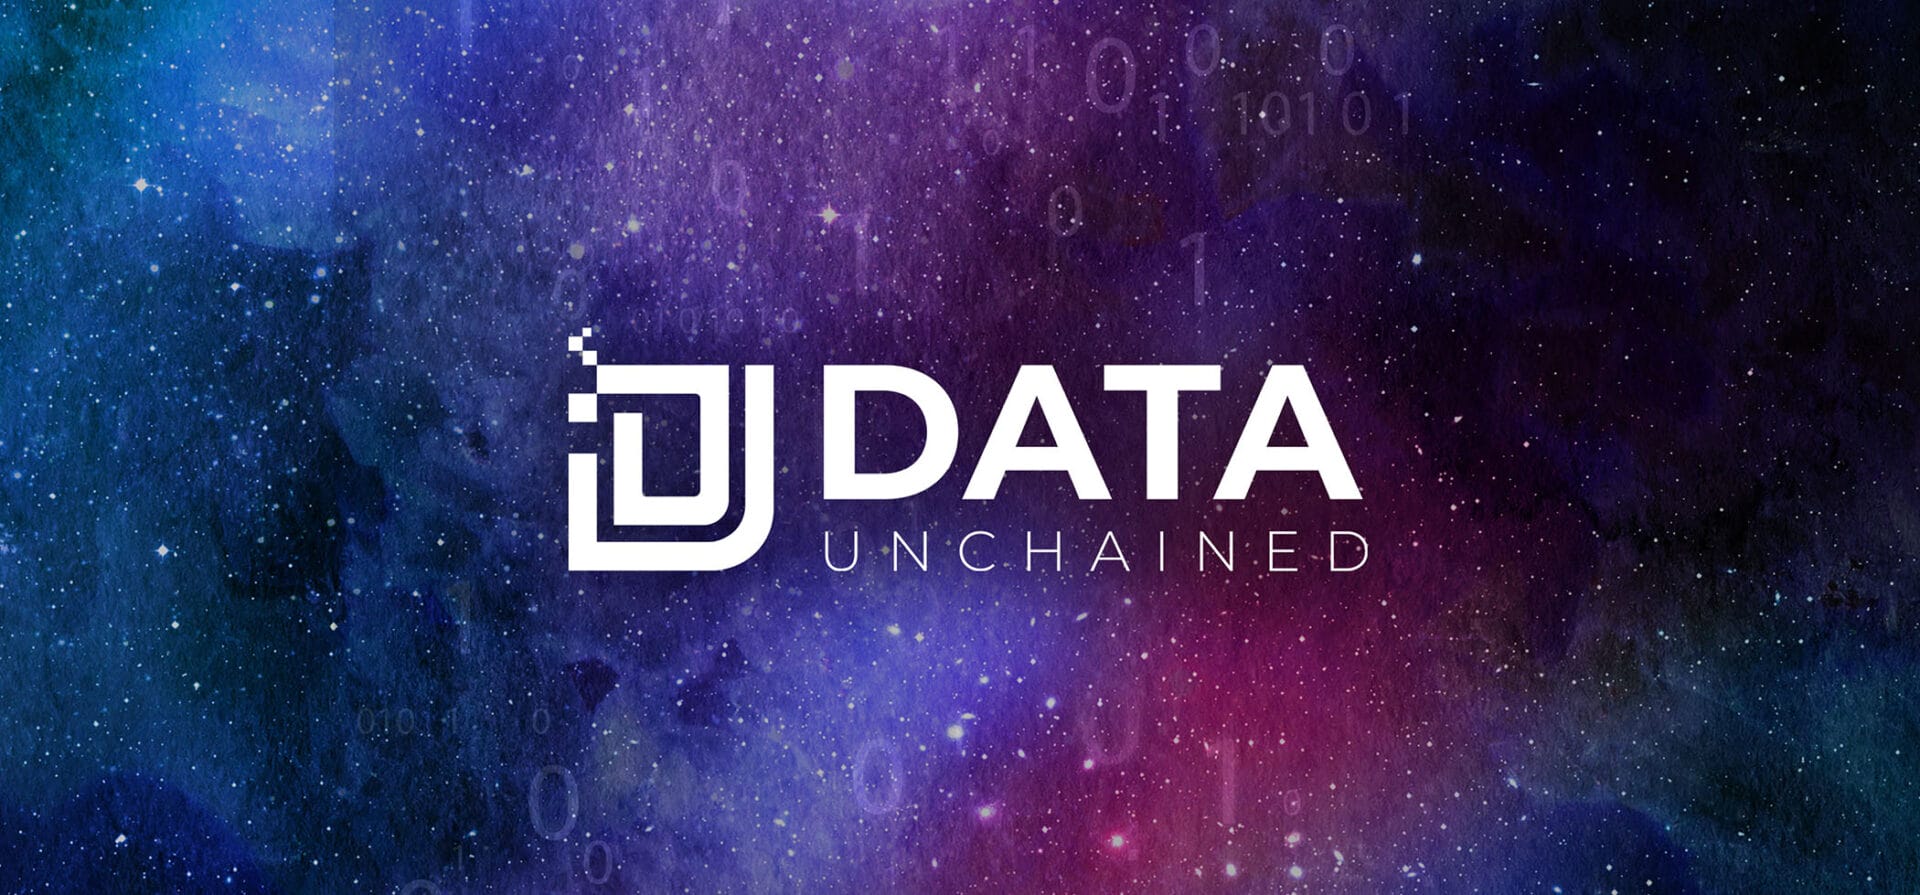 Data-Driven Organizations Need Their Data Freed from Silos: Introducing the Data Unchained Podcast 